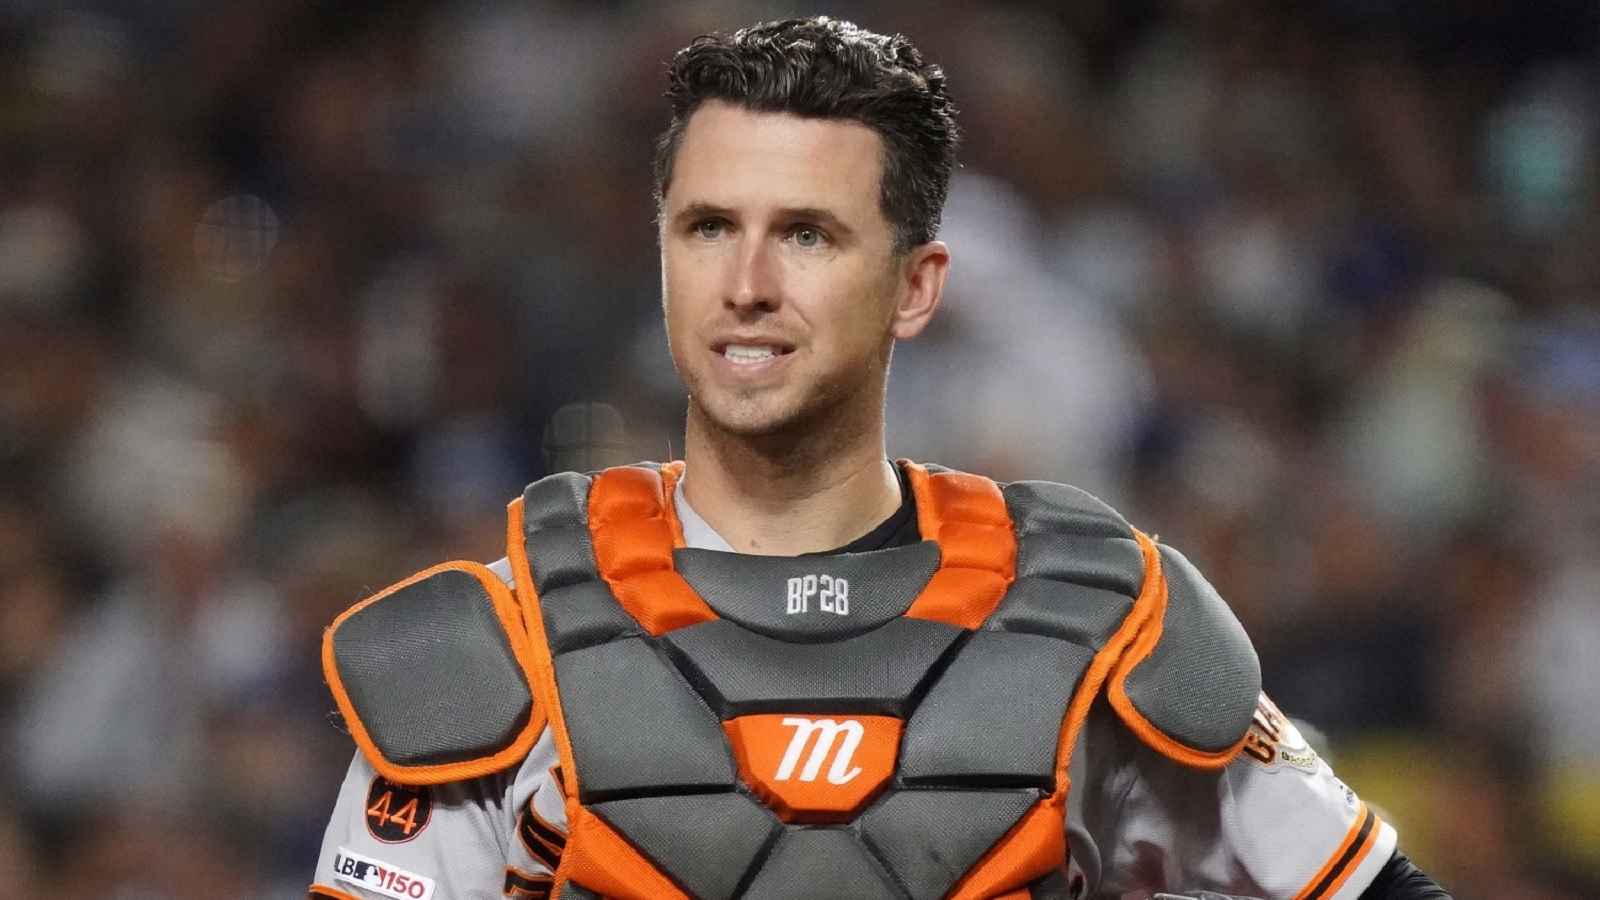 Giants announce major new role for Buster Posey